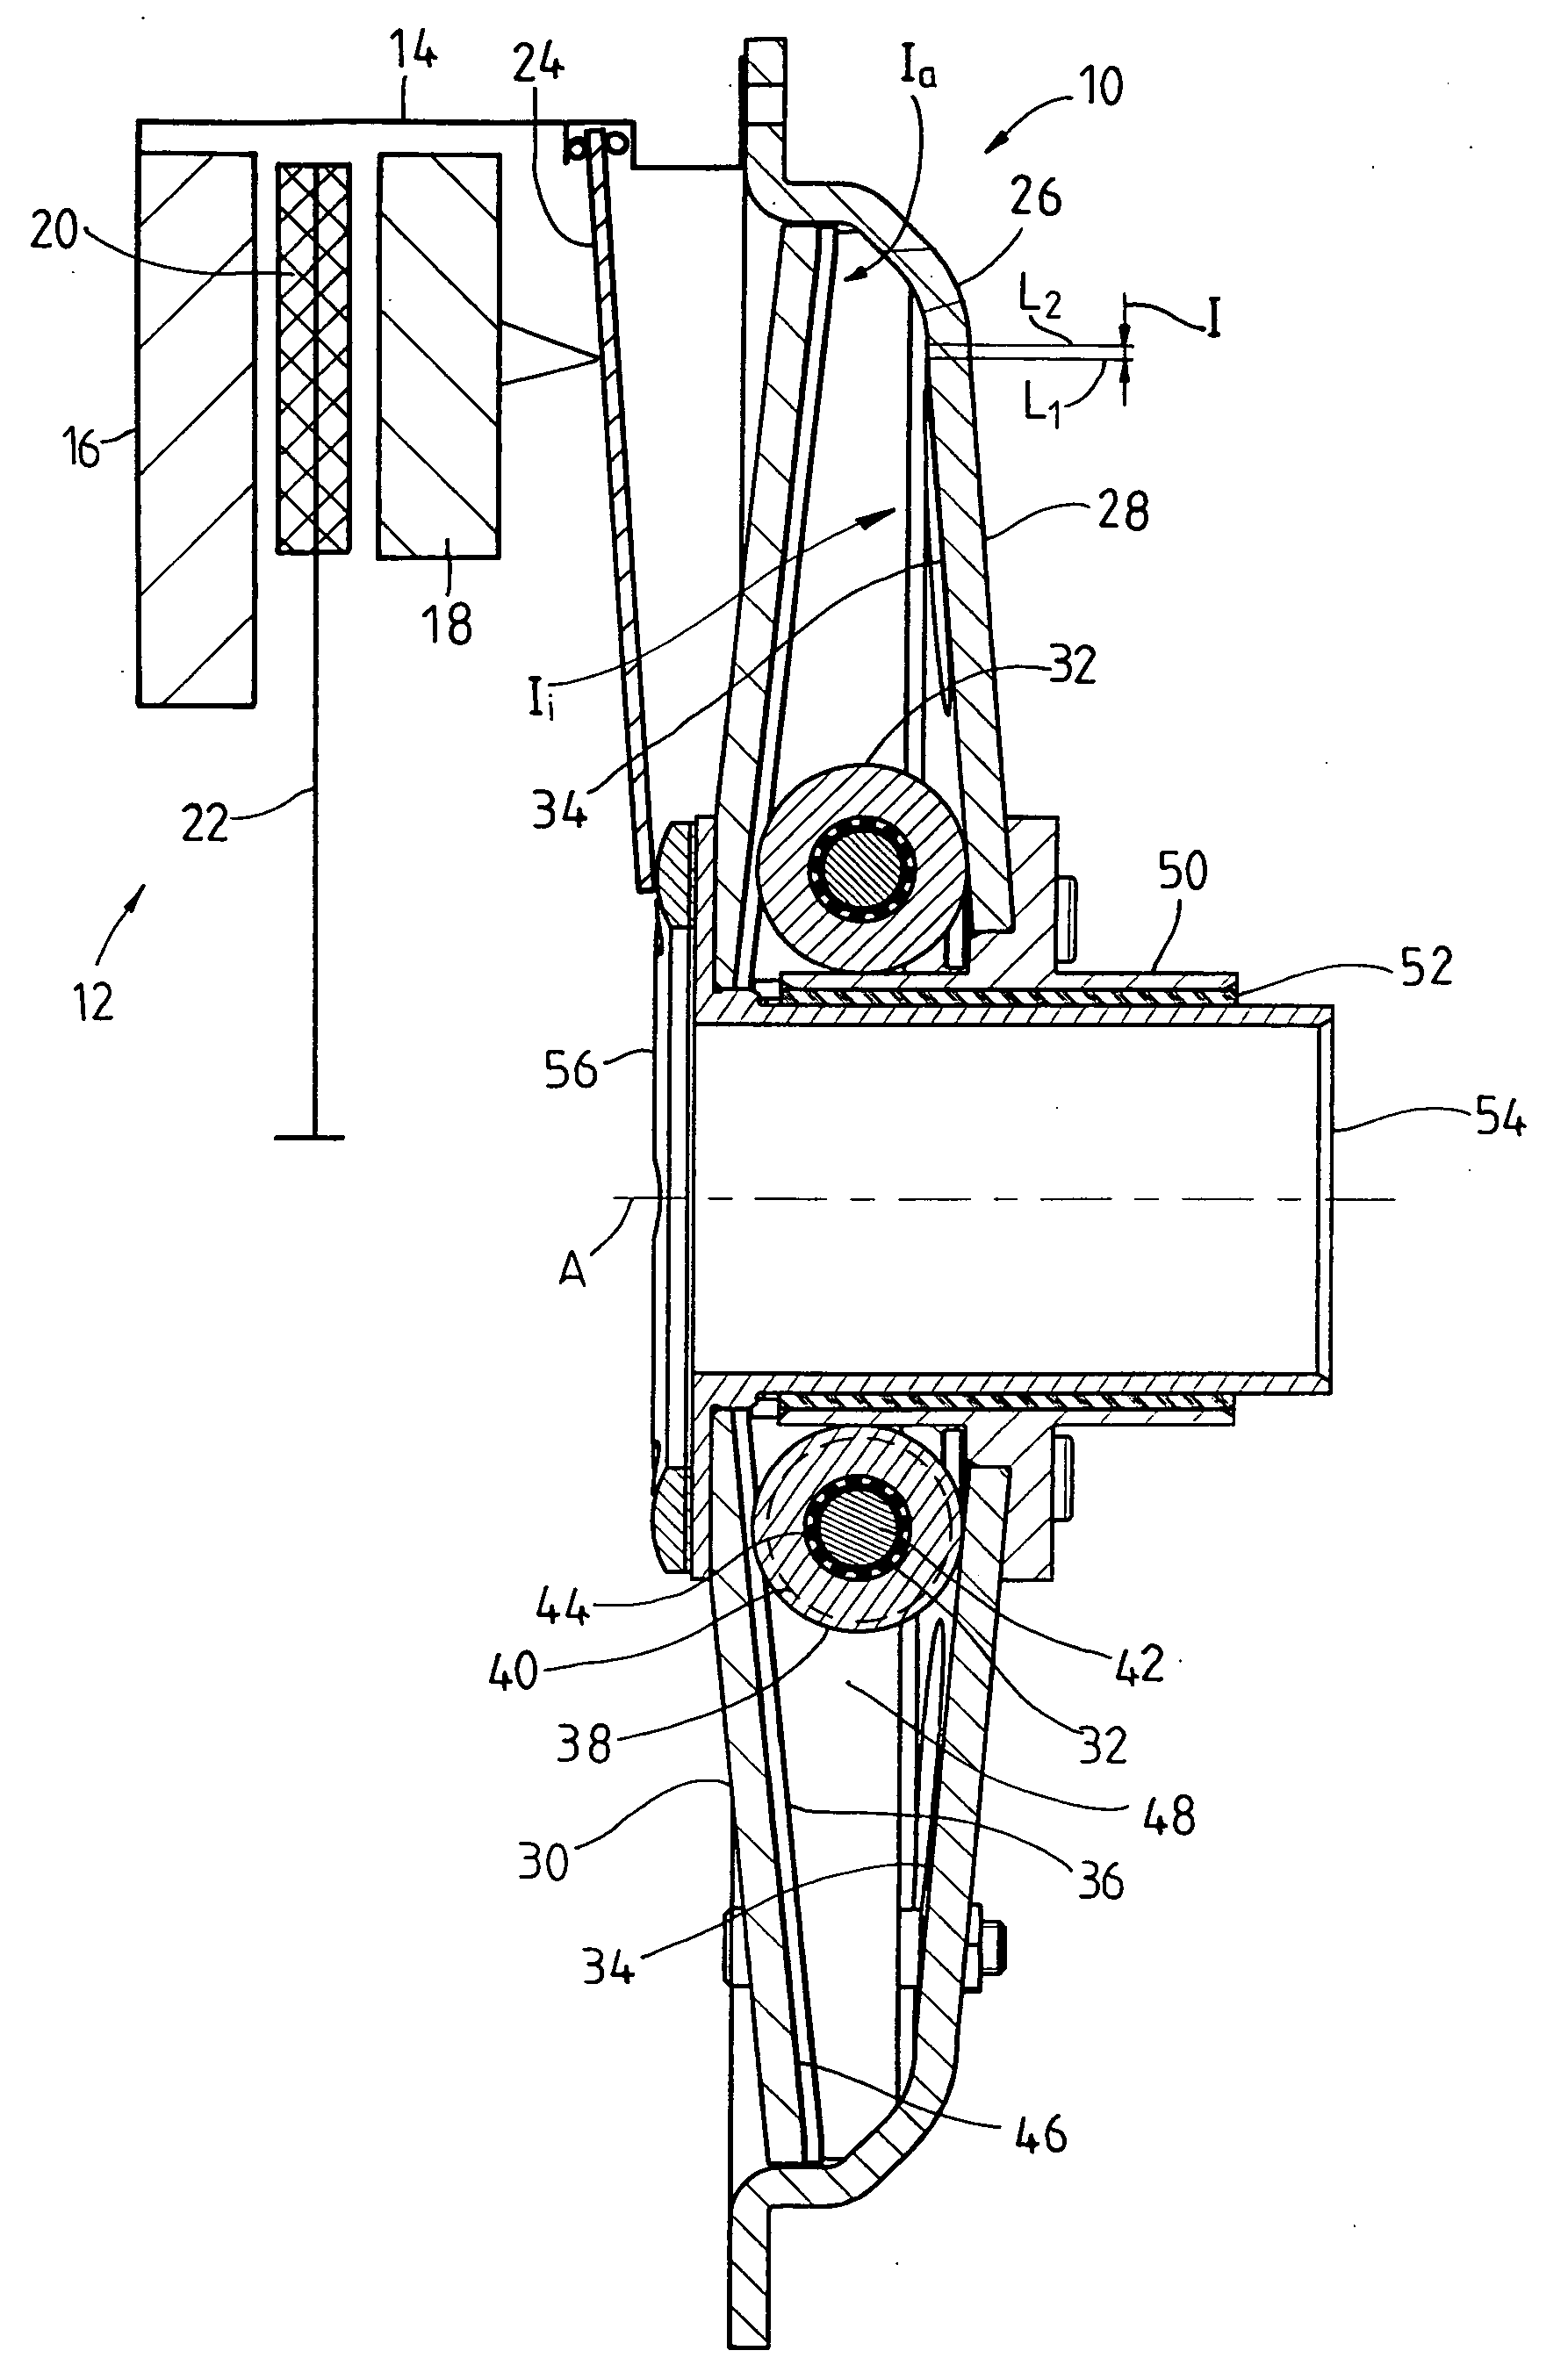 Arrangement for generating actuation force in a centrifugal clutch